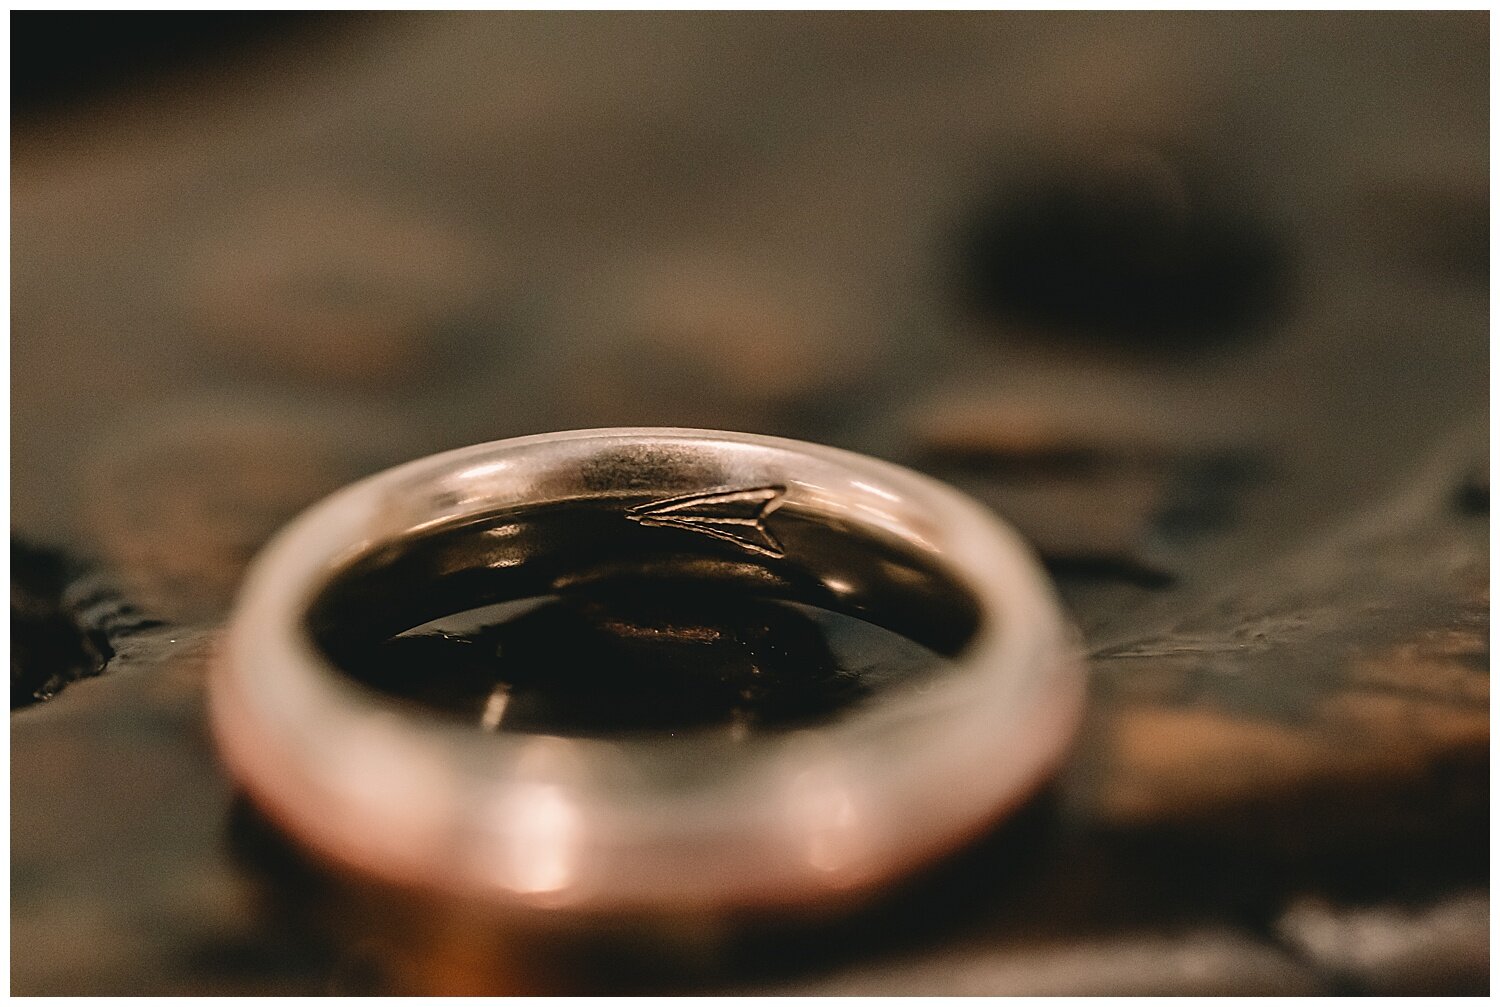  A paper airplane etched into the inside of the groom’s ring. See what I mean about all these thoughtful little touches?! These two are the sweetest!  